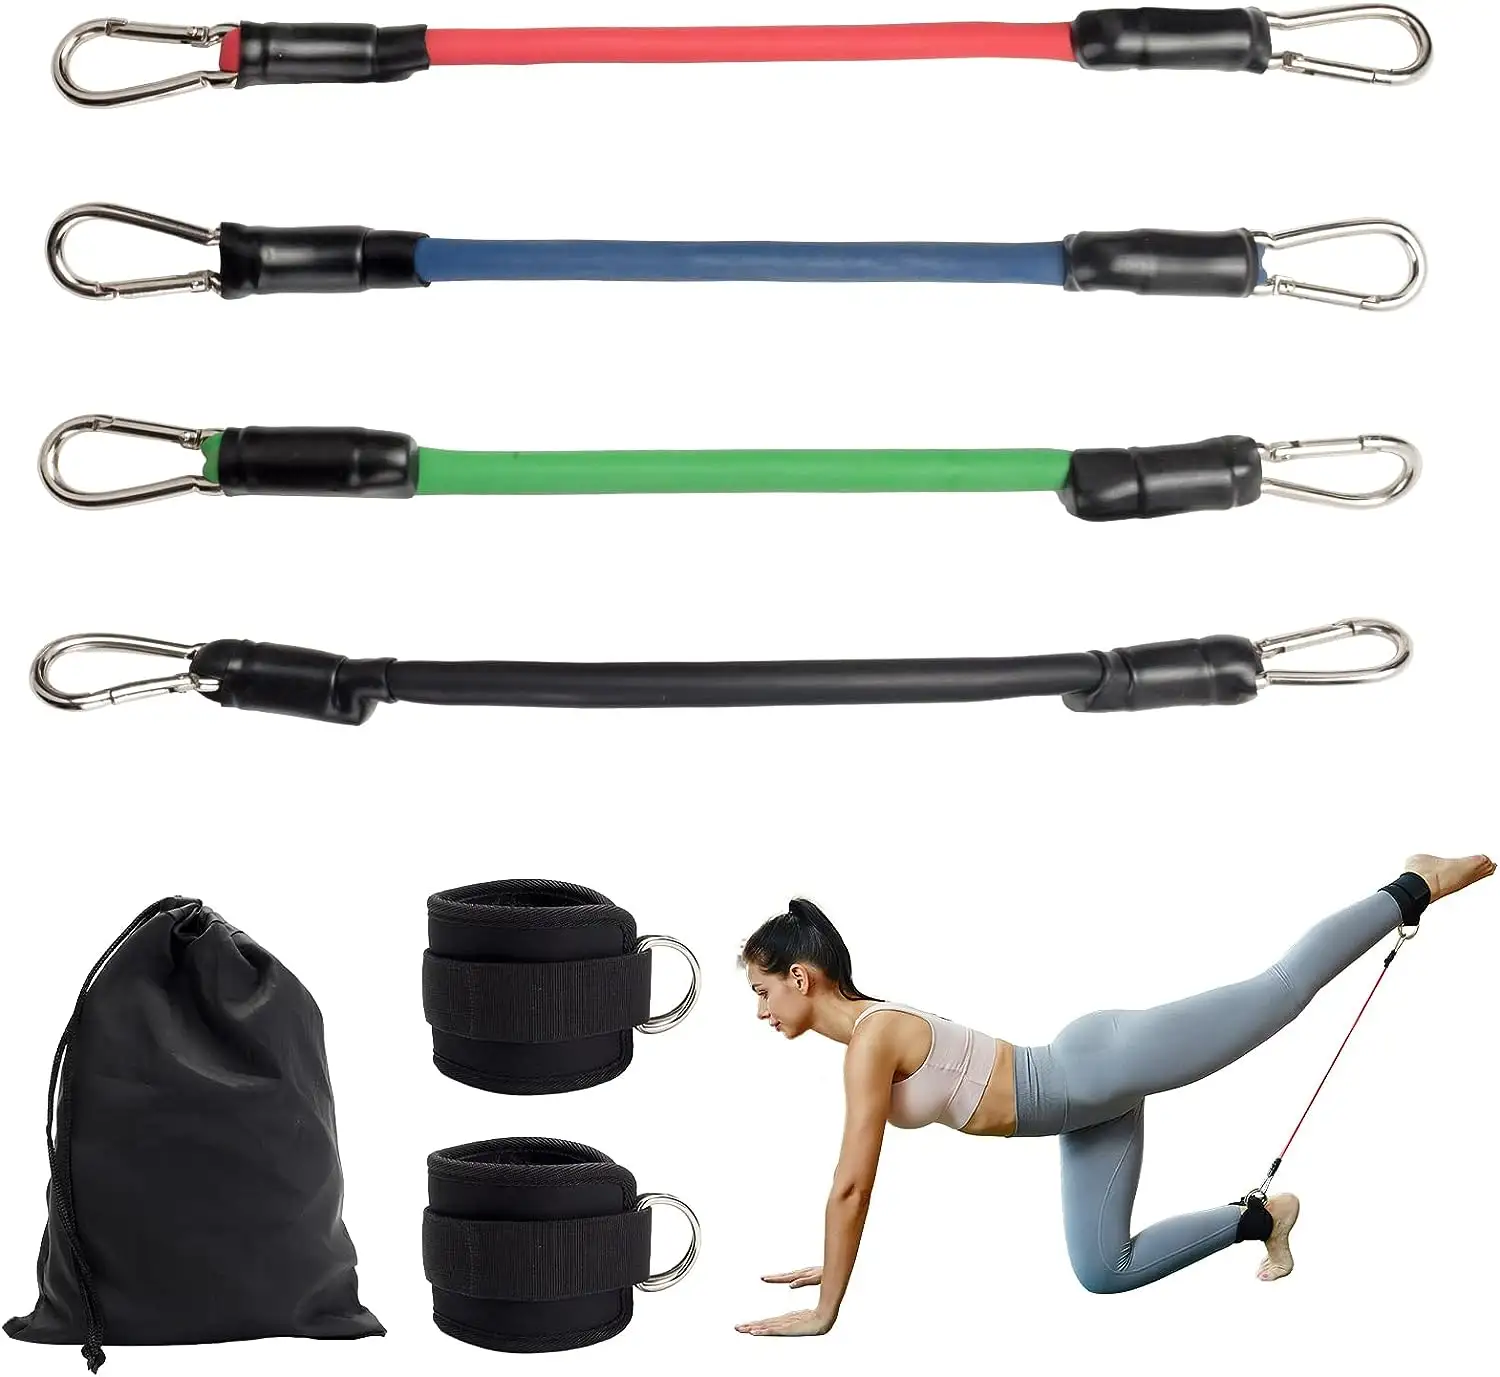 Agility Training Strength Ankle Straps Fitness Kinetic Resistance Bands Leg Resistance Bands Kit